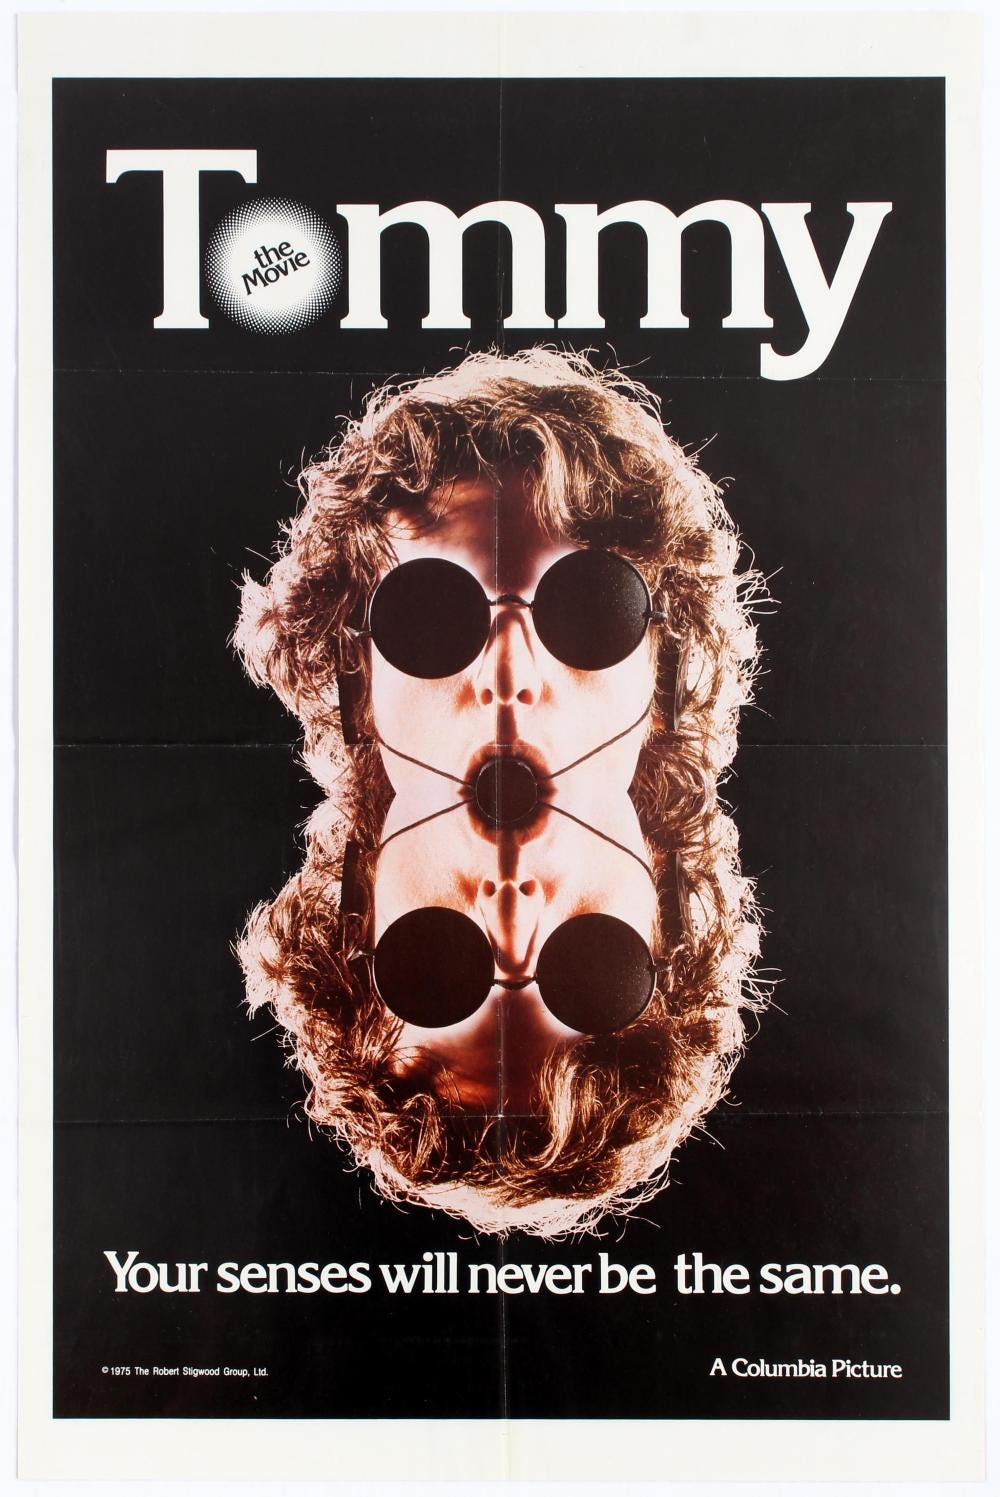 Image result for the who tommy movie poster